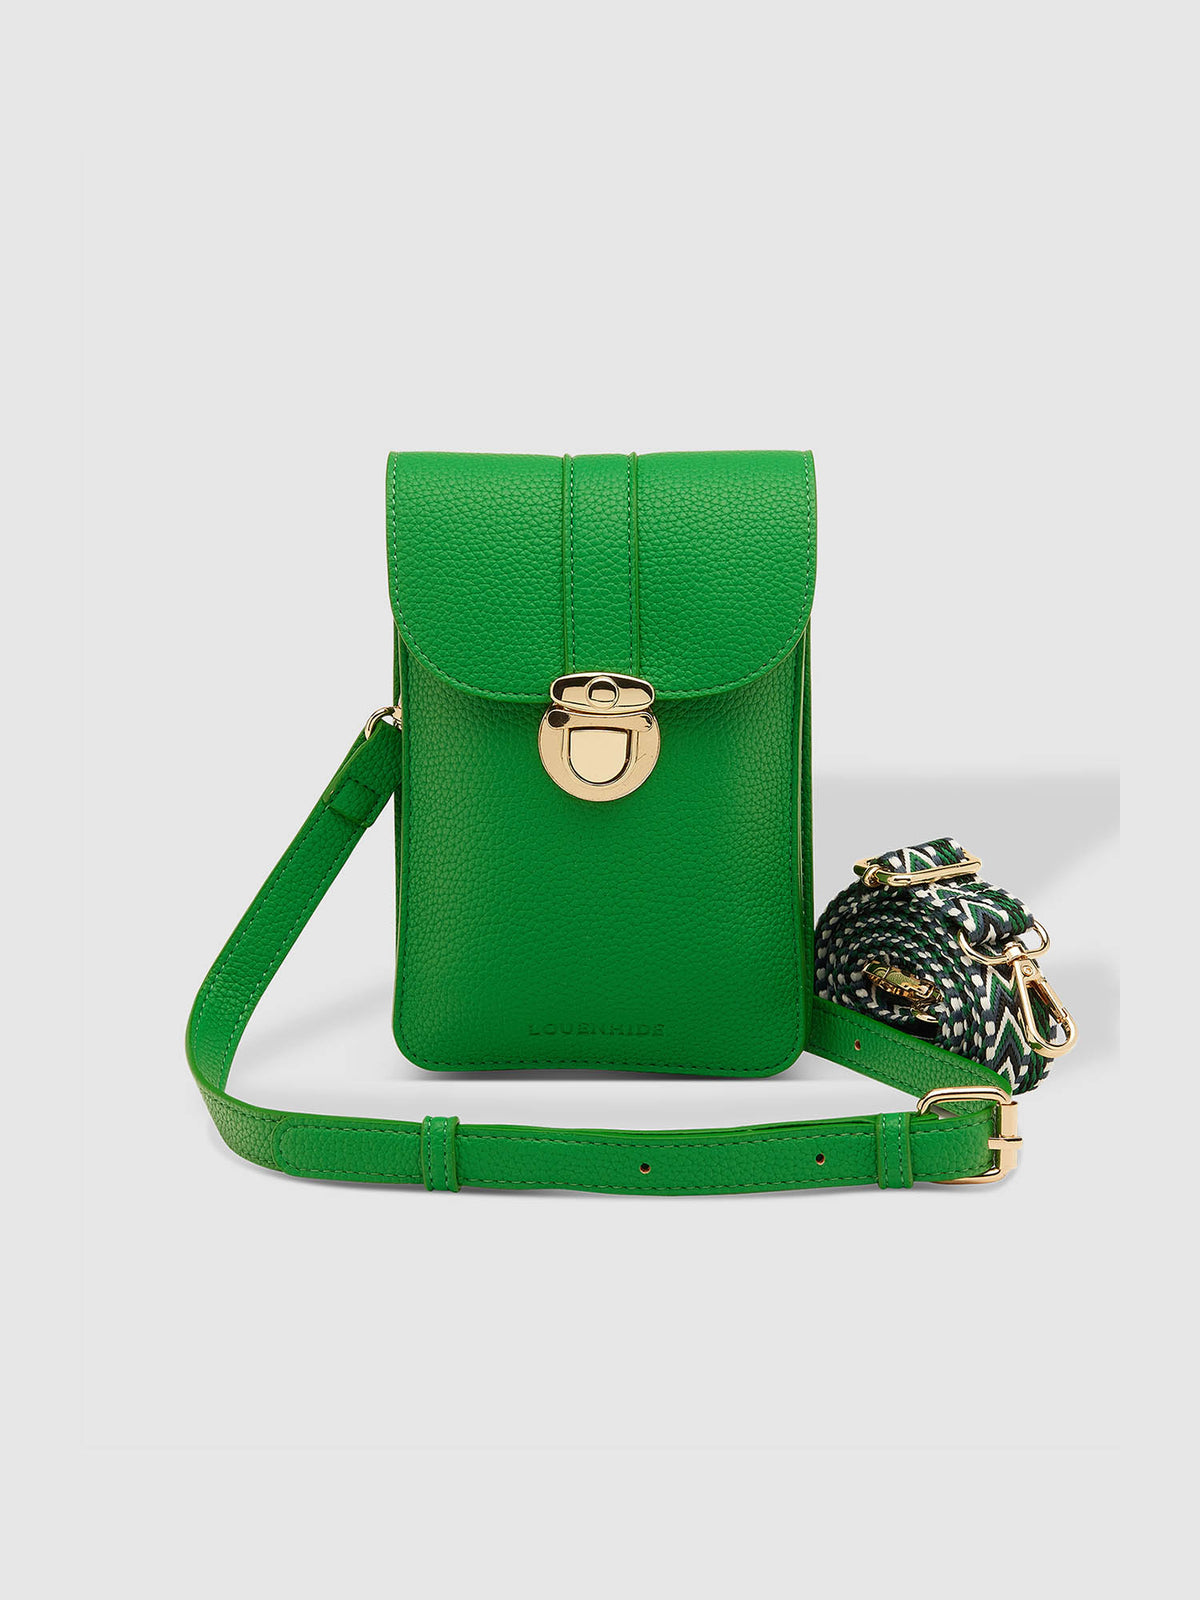 LOUENHIDE fontaine phone crossbody bag in apple green